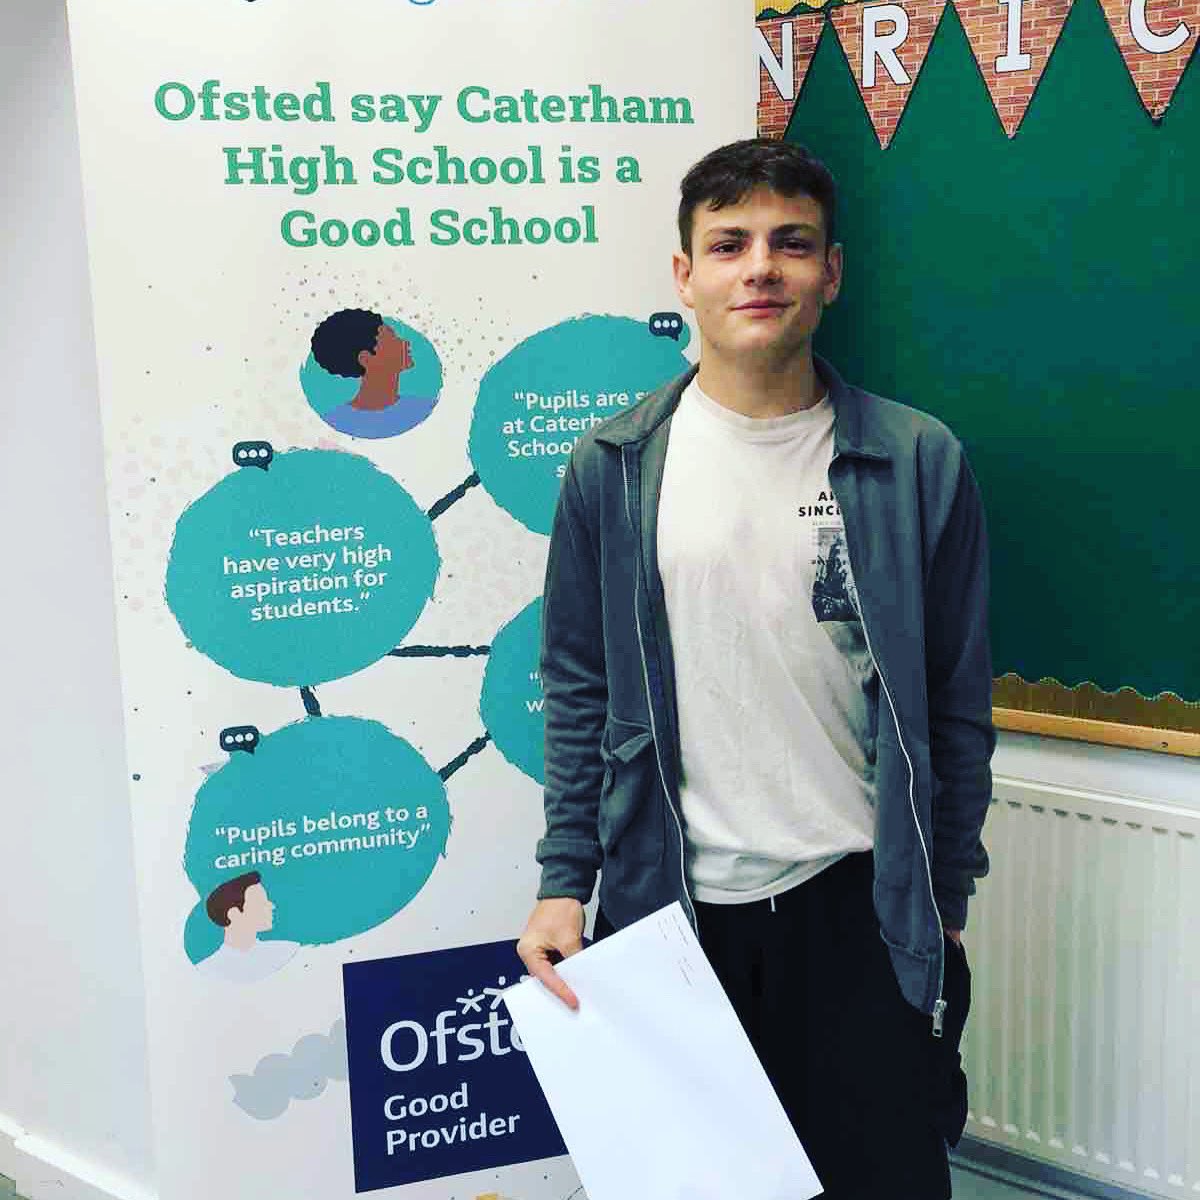 An incredible achievement by Mark who arrived from Ukraine a year and half ago and passed everything in his GCSEs. He will be studying fitness instruction. “I couldn’t speak English when I arrived from Ukraine. I passed the grades I wanted.” #SixthForm @RedbridgeLive